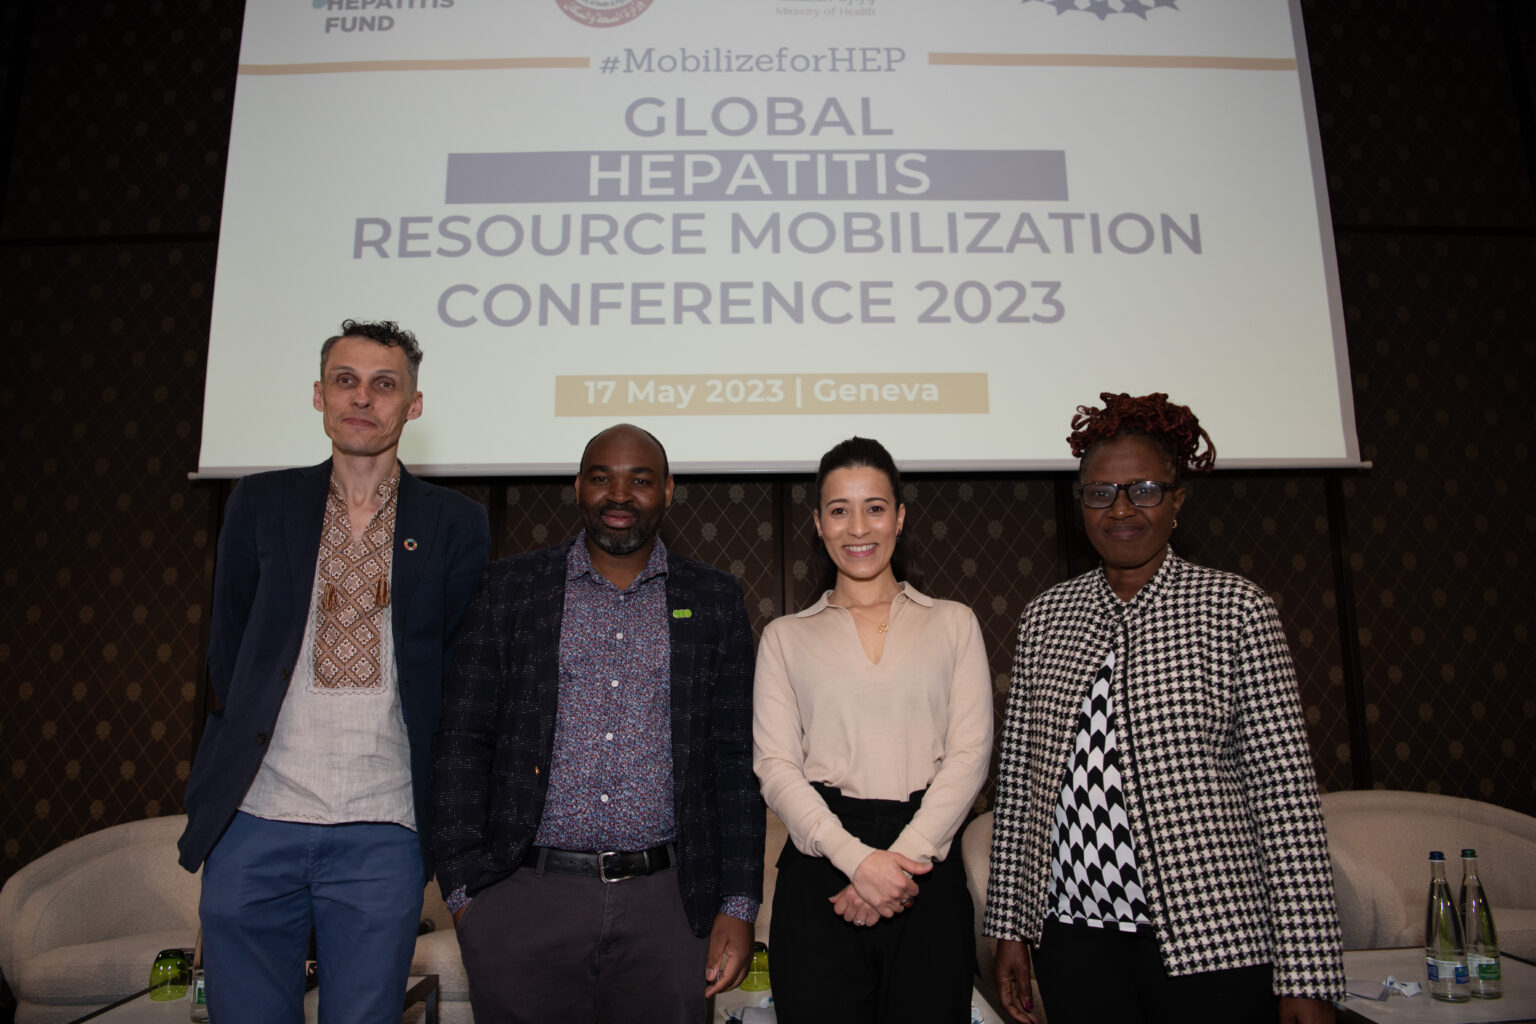 Speakers at the 2023 Global Hepatitis Resource Mobilization Conference.